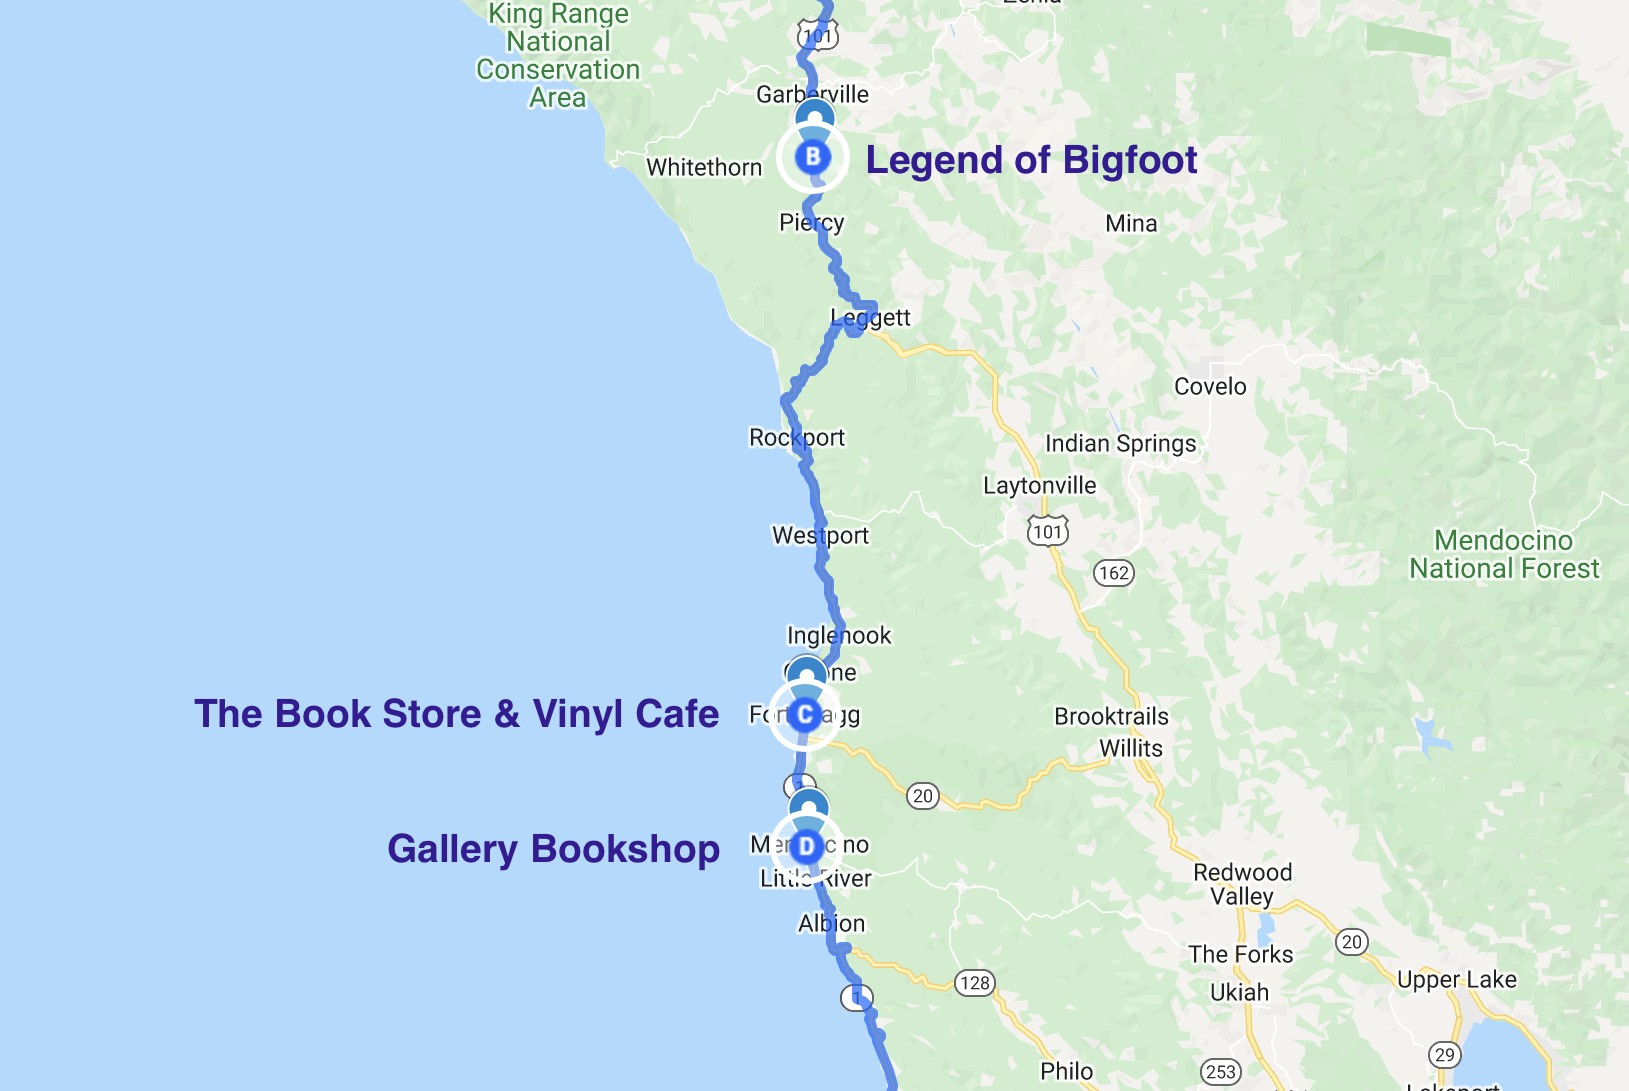 map of literary stops along the northern californian coastline